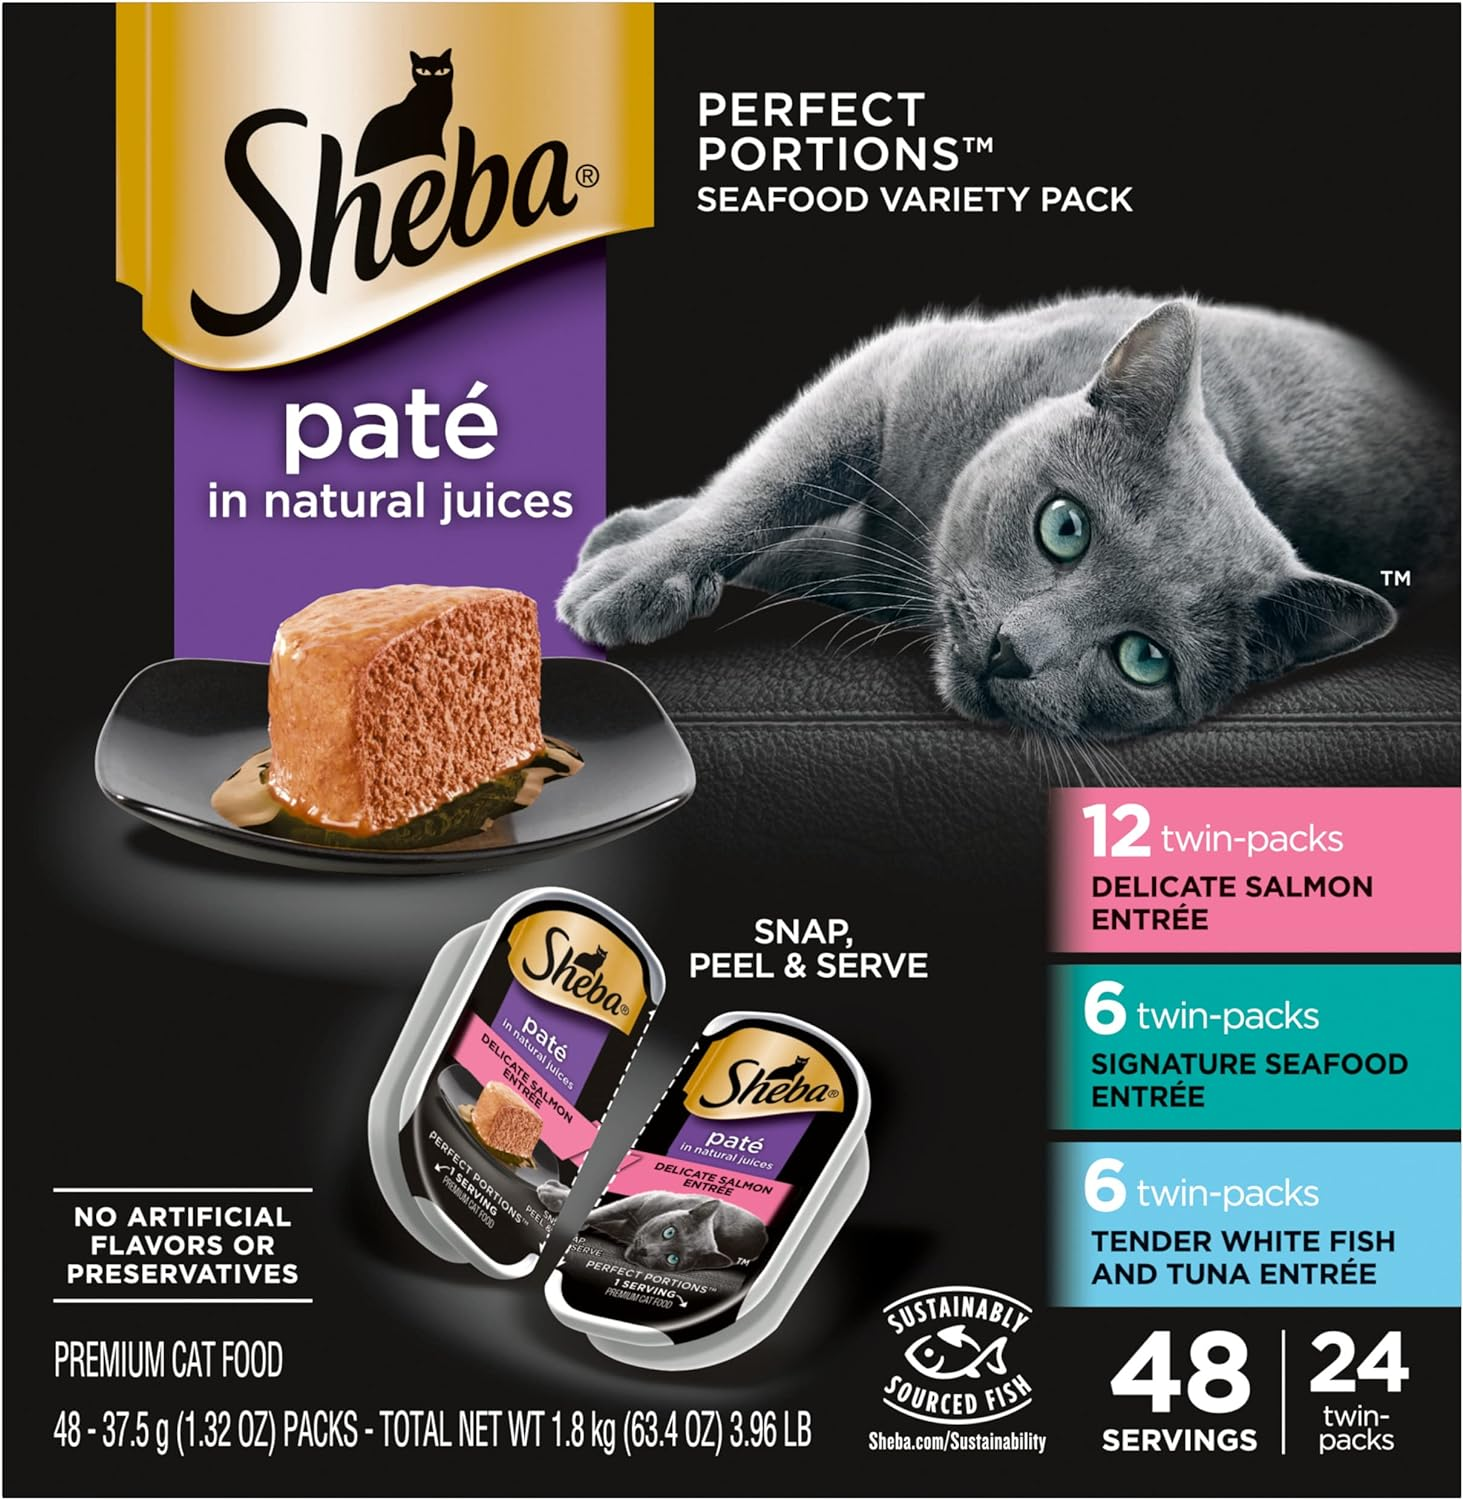 SHEBA PERFECT PORTIONS Paté Adult Wet Cat Food Trays (24 Count, 48 Servings), Signature Seafood Entrée, Easy Peel Twin-Pack Trays : 96 servings